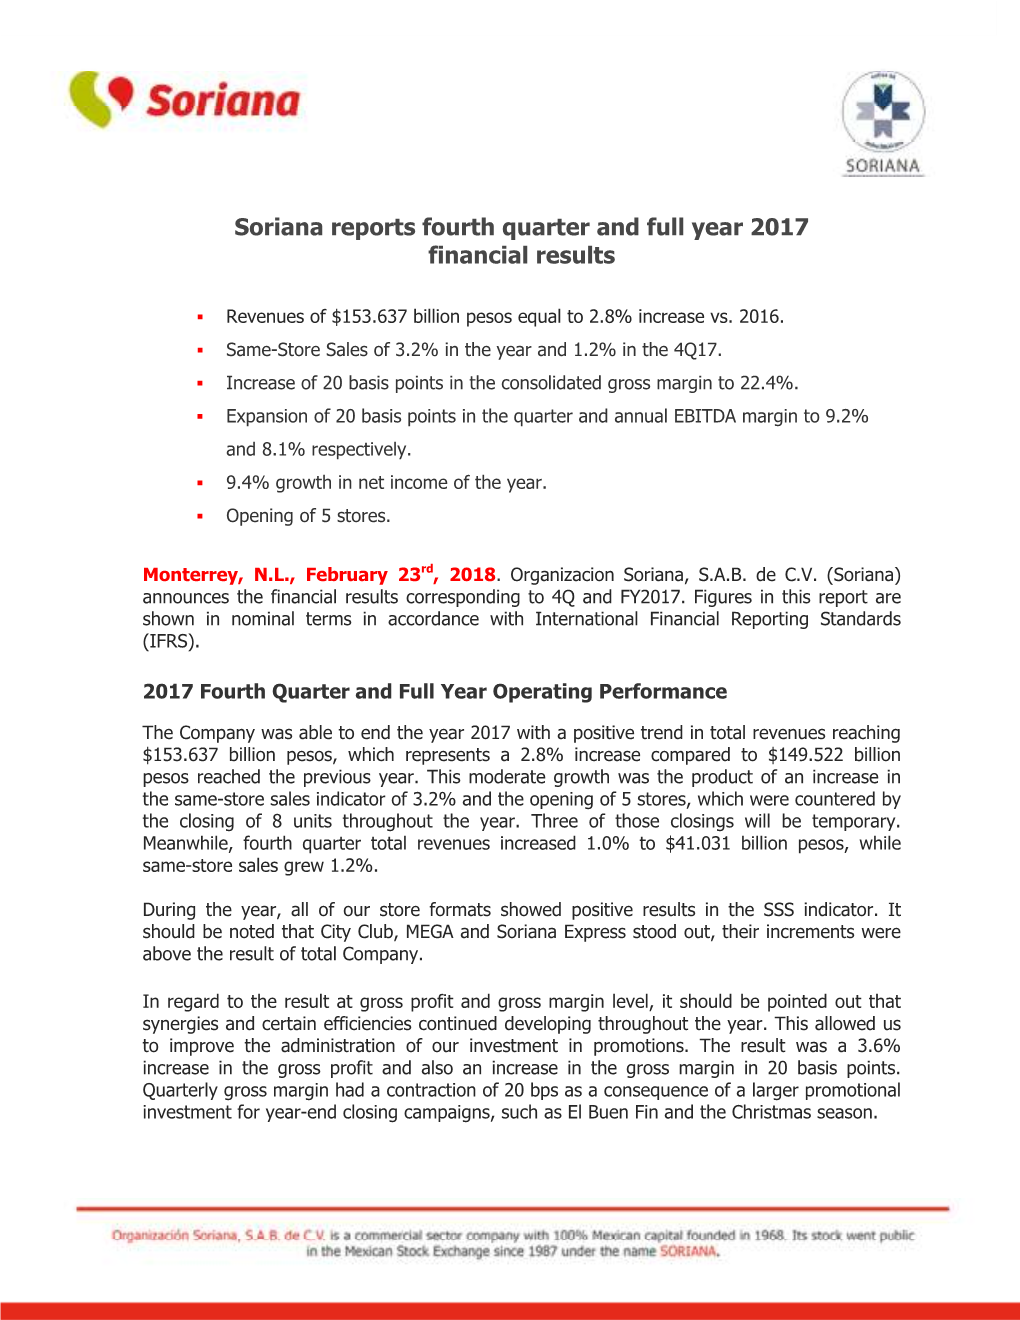 Soriana Reports Fourth Quarter and Full Year 2017 Financial Results